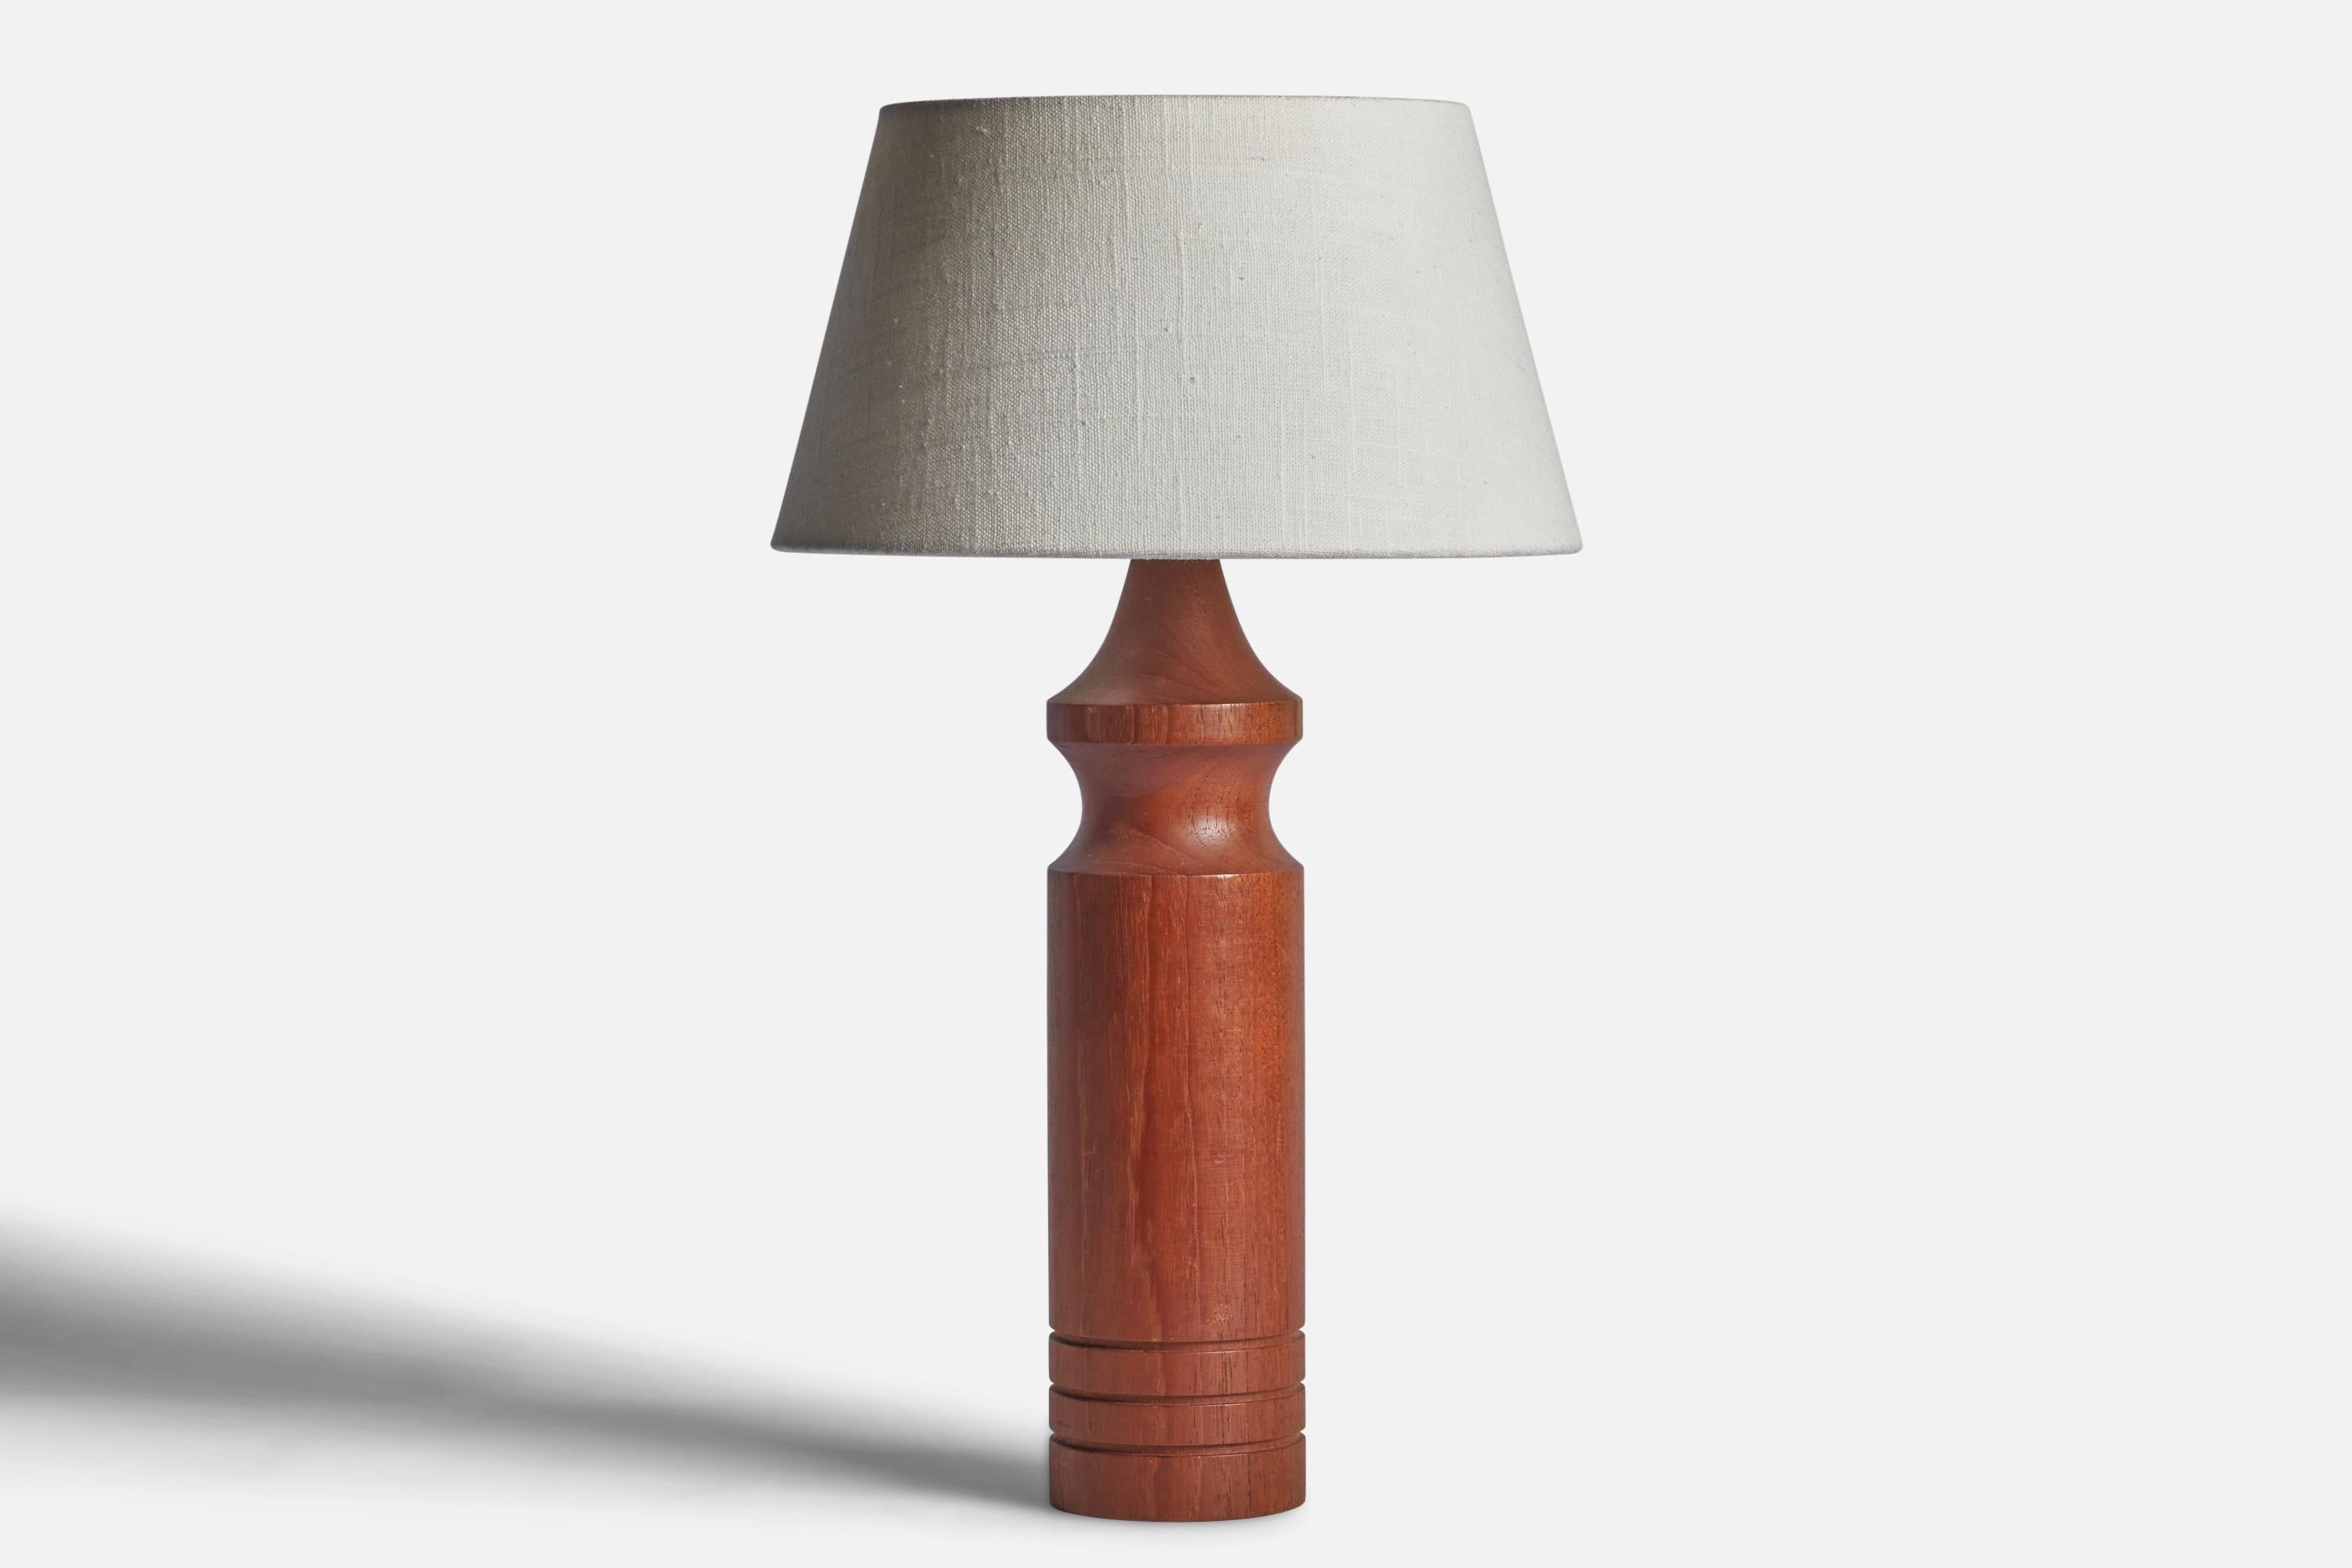 A teak table lamp designed and produced in Sweden, 1950s.

Dimensions of Lamp (inches): 10.75” H x 5.75” Diameter
Dimensions of Shade (inches): 7” Top Diameter x 10” Bottom Diameter x 5.5” H 
Dimensions of Lamp with Shade (inches): 17.25” H x 10”